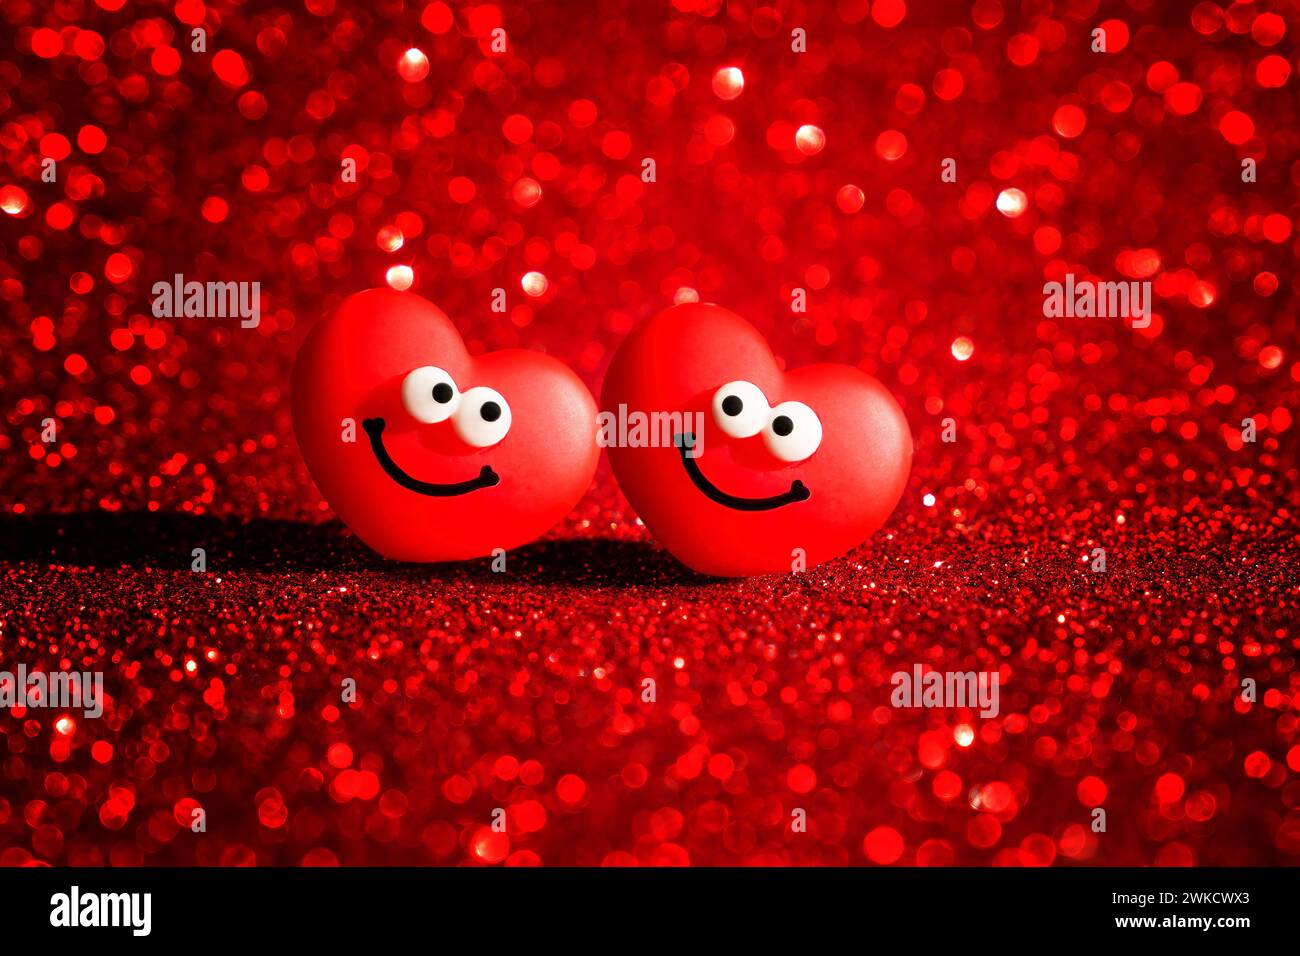 Two smiling heart characters radiate joy on a sparkling red backdrop, creating the perfect Valentine's Day card. Stock Photo